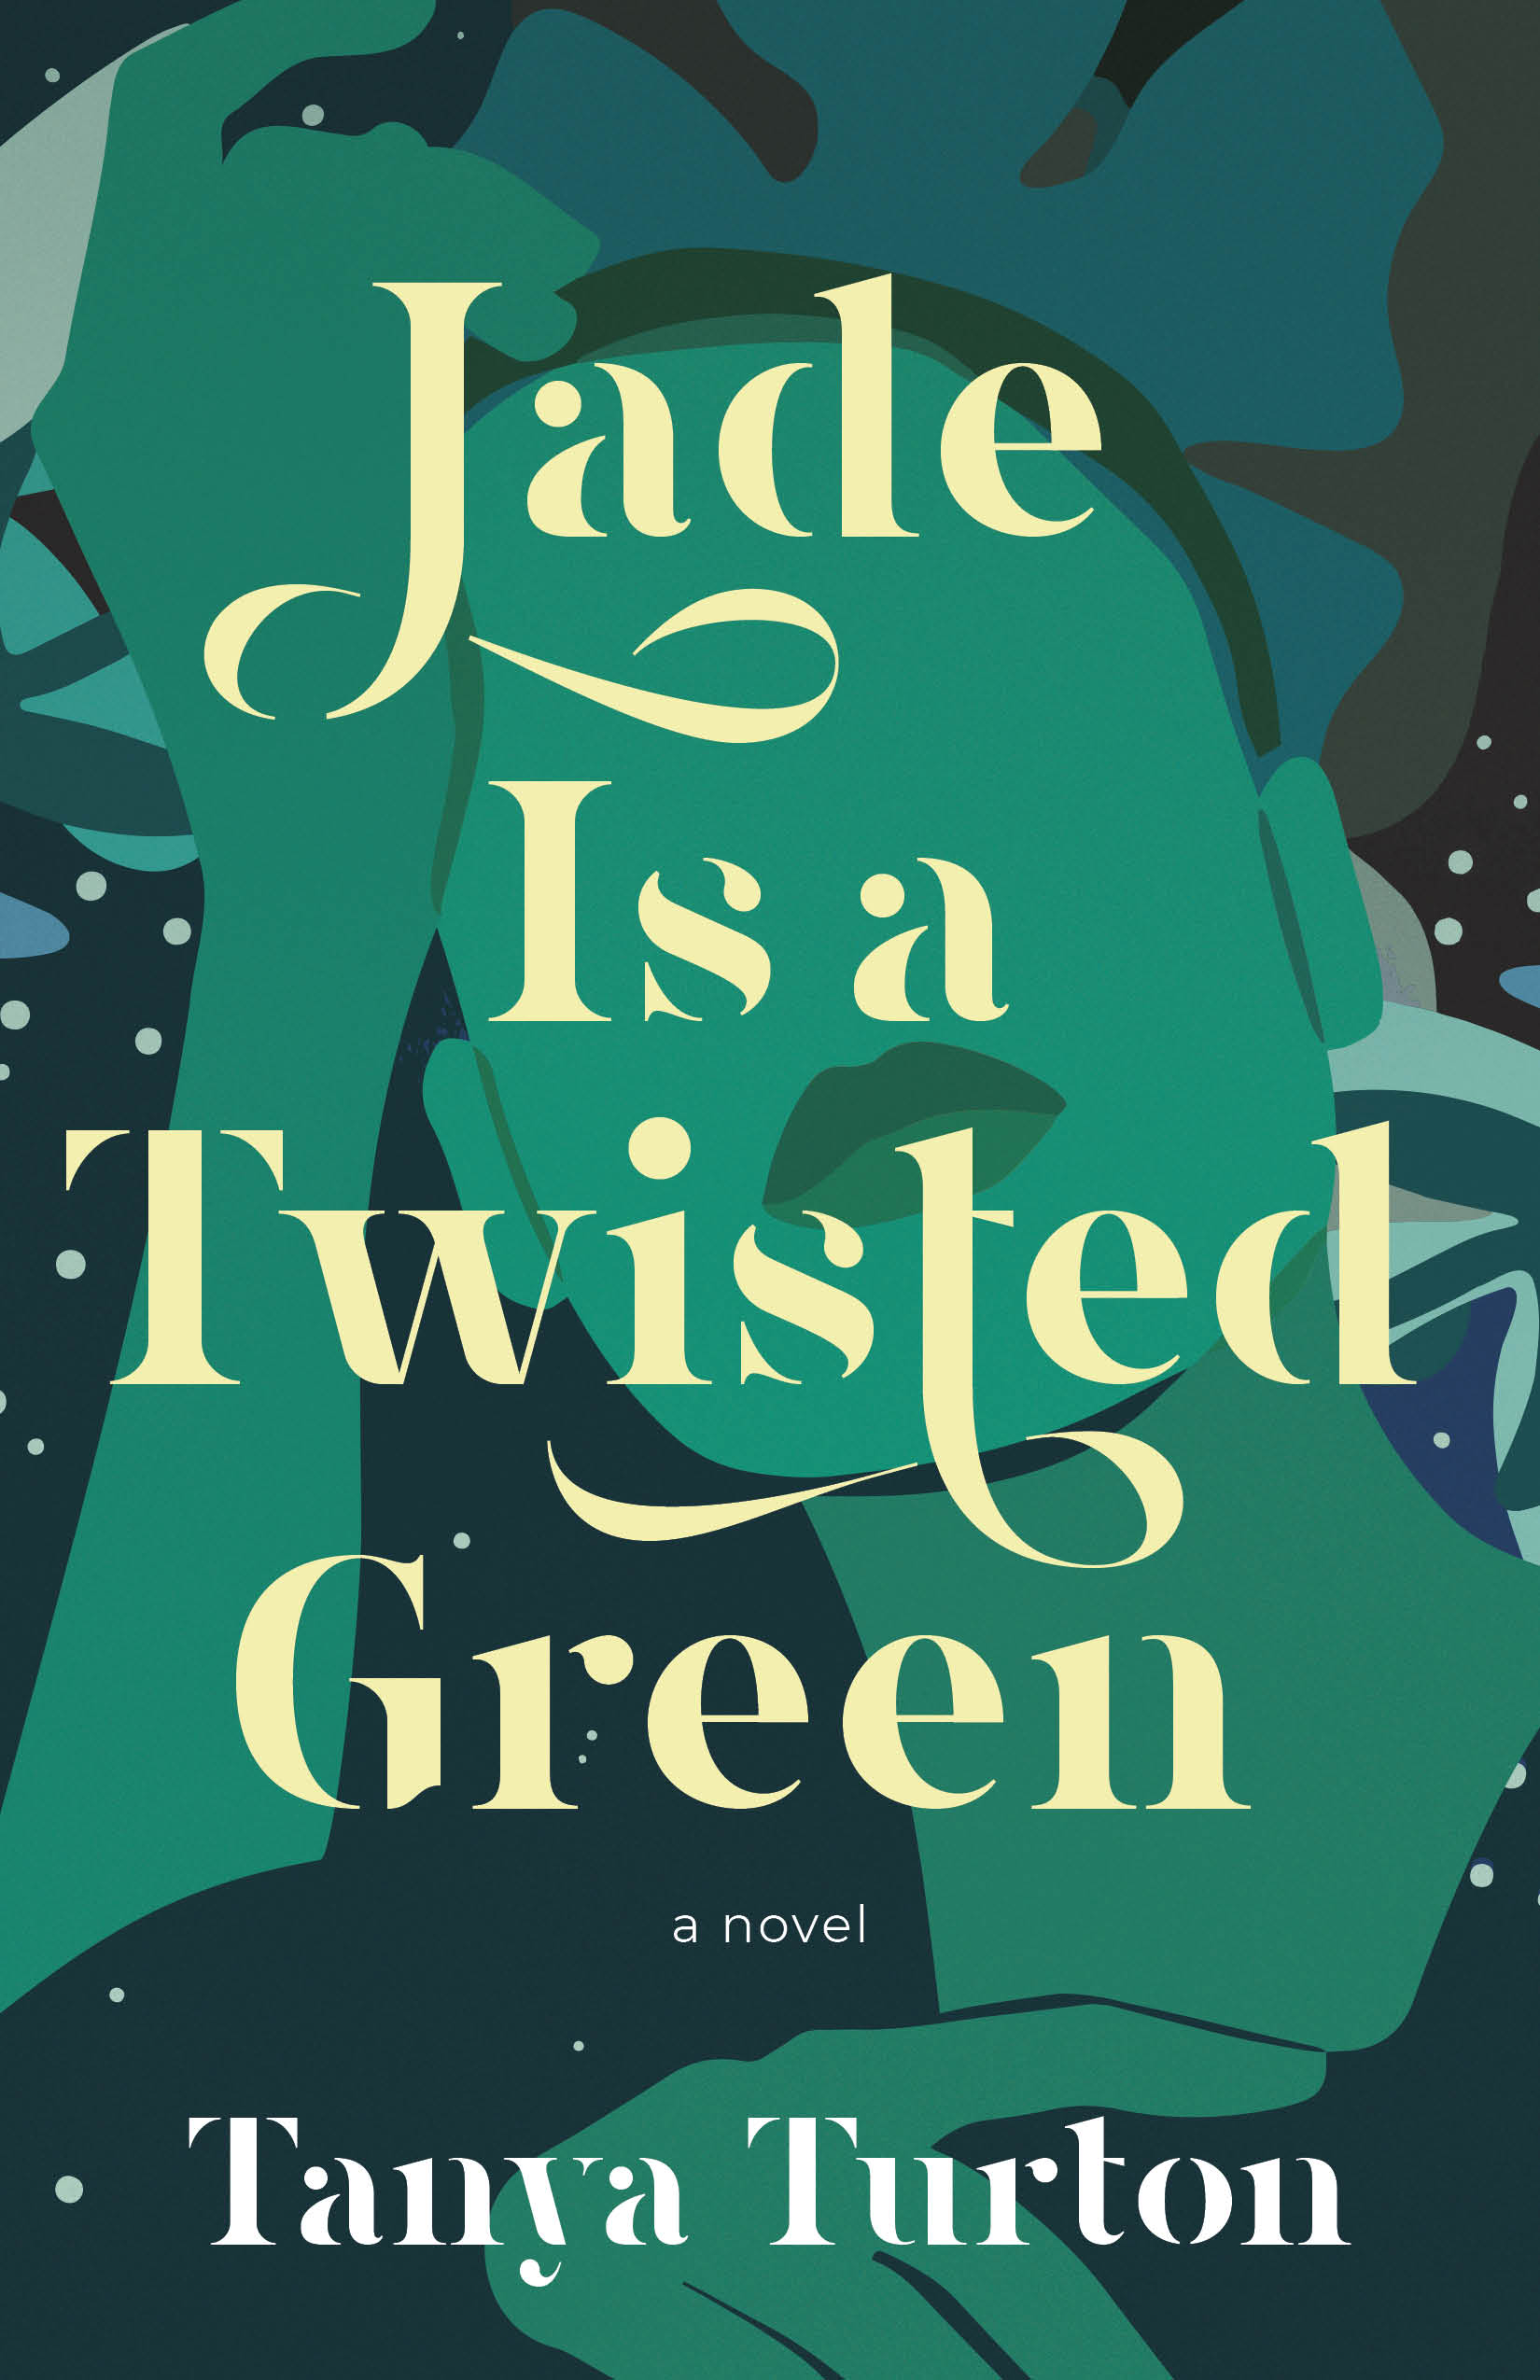 Jade is a twisted green book cover